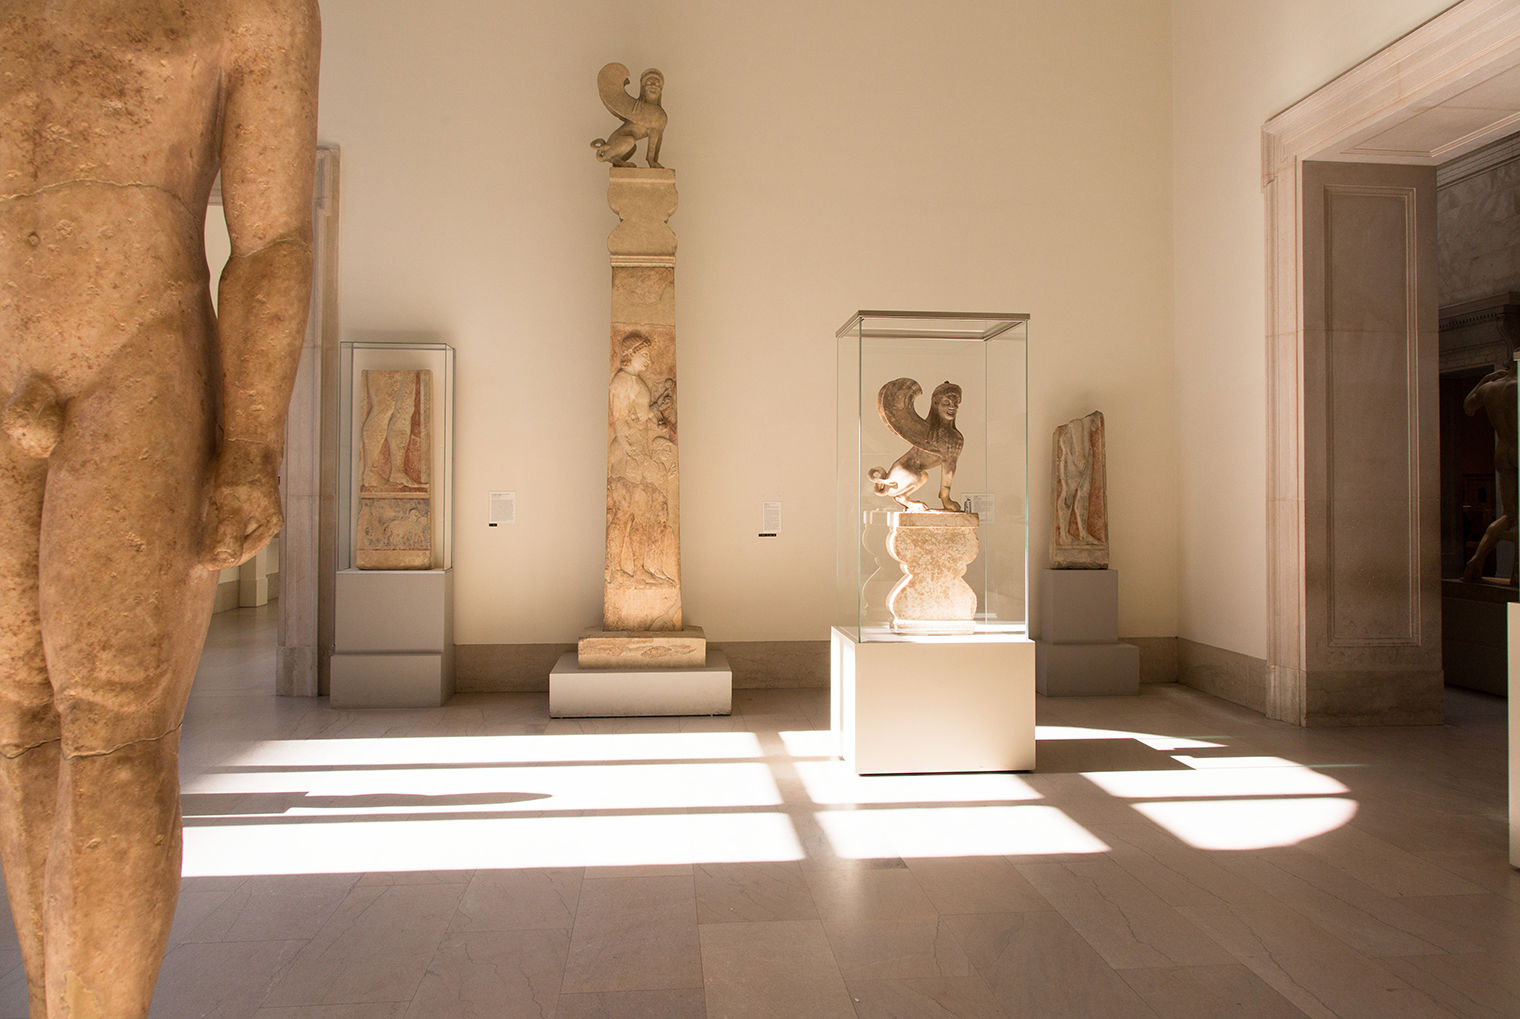 A sunlit Gallery 154 at The Met. Beyond a nude male sculpture in the left foreground, the tall stele is located along the back wall, between two marble stone fragments. The crowning sphinx is in a glass case in the center of the room.